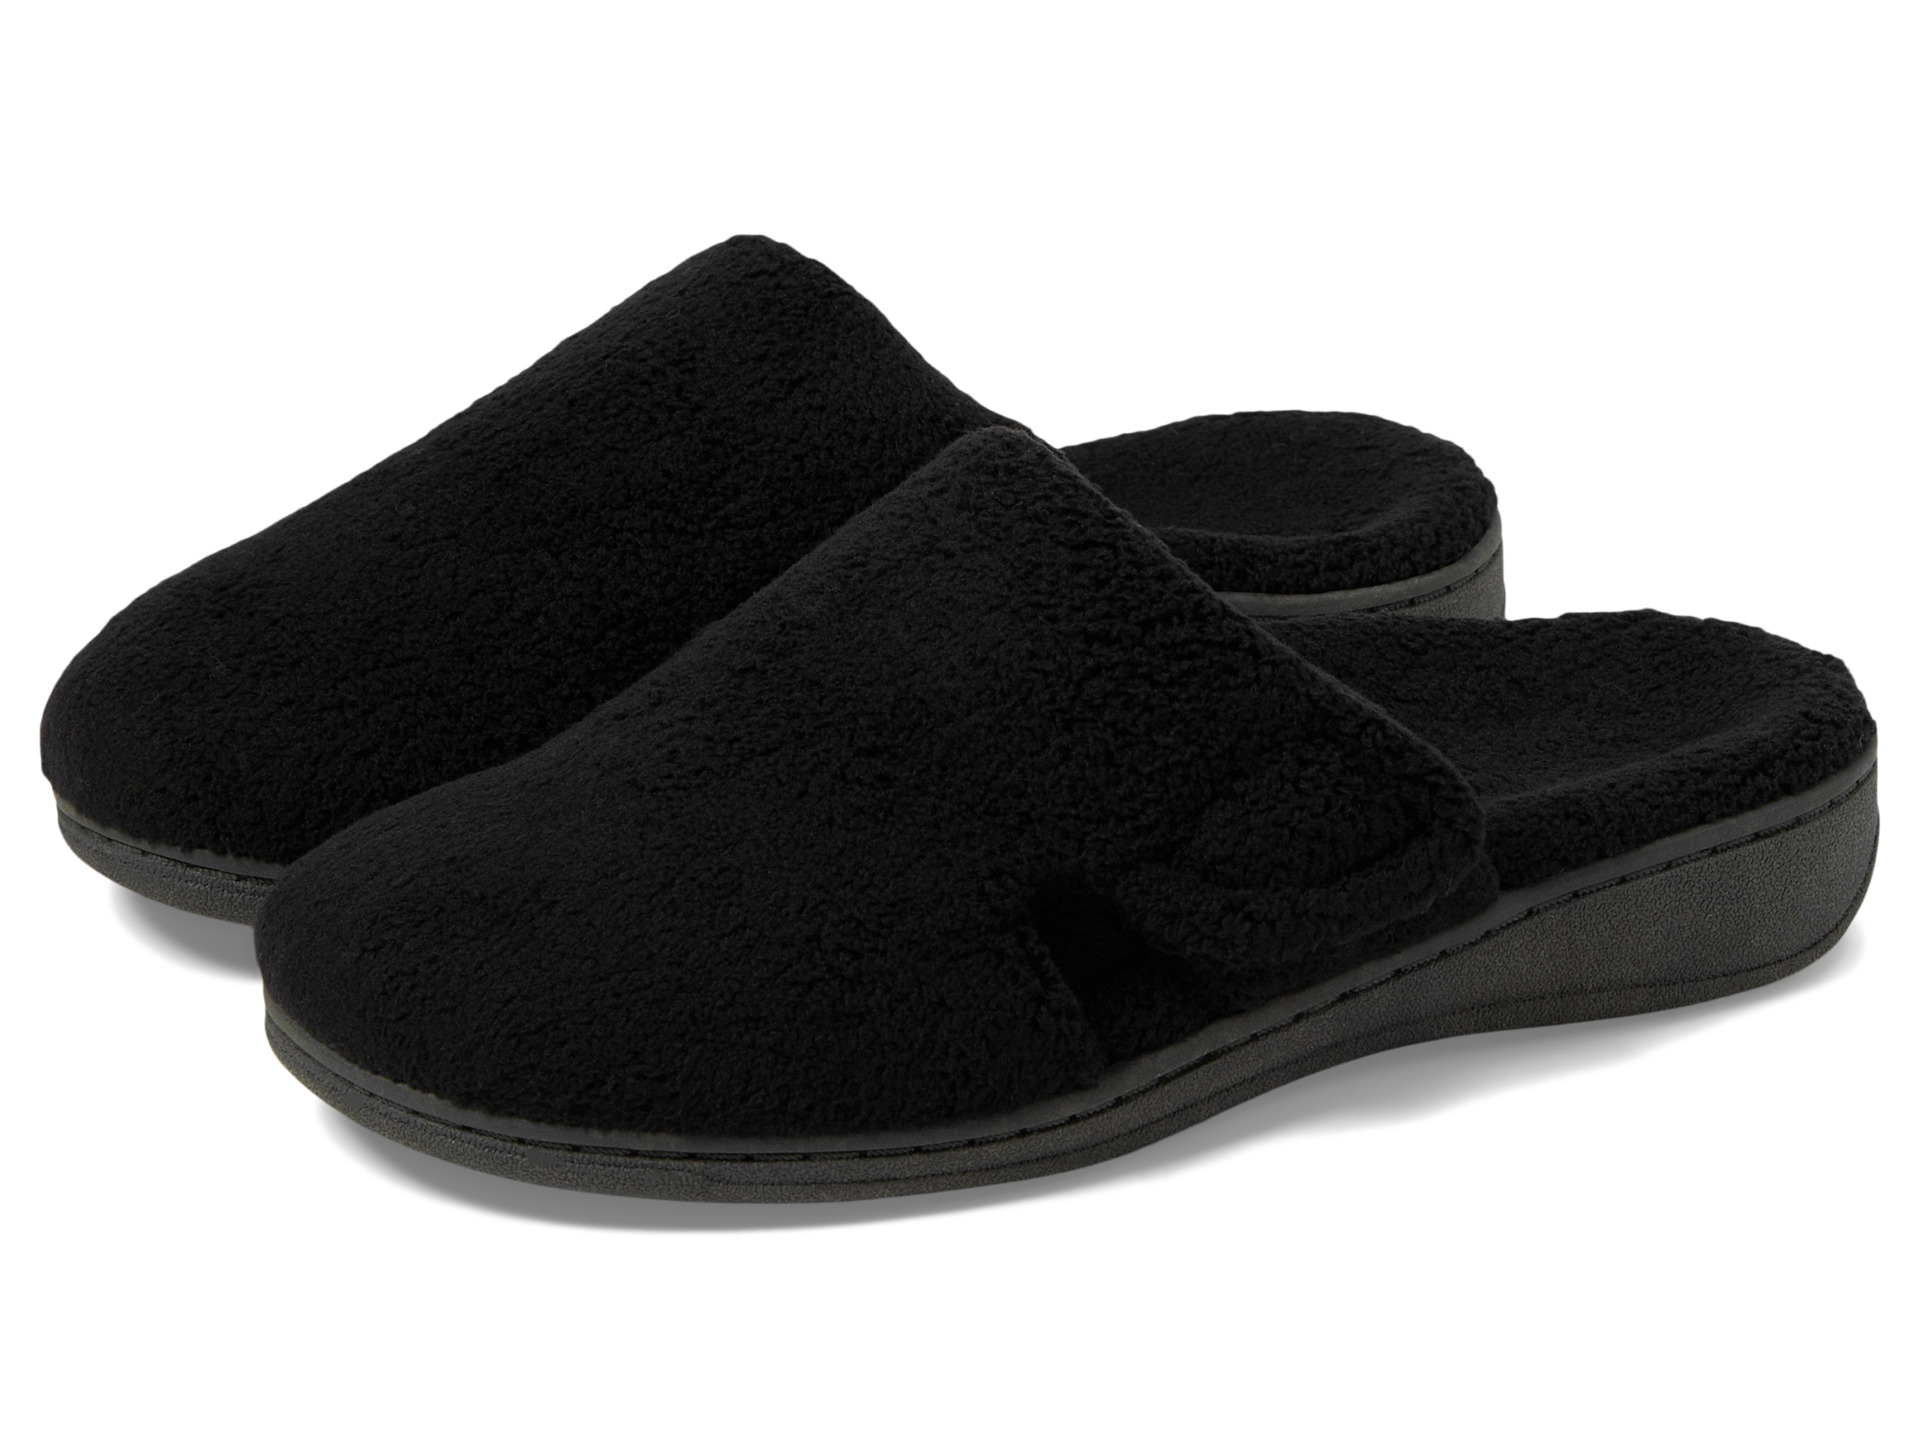 VIONIC with Orthaheel Technology Gemma Mule Slipper - Zappos Free ...